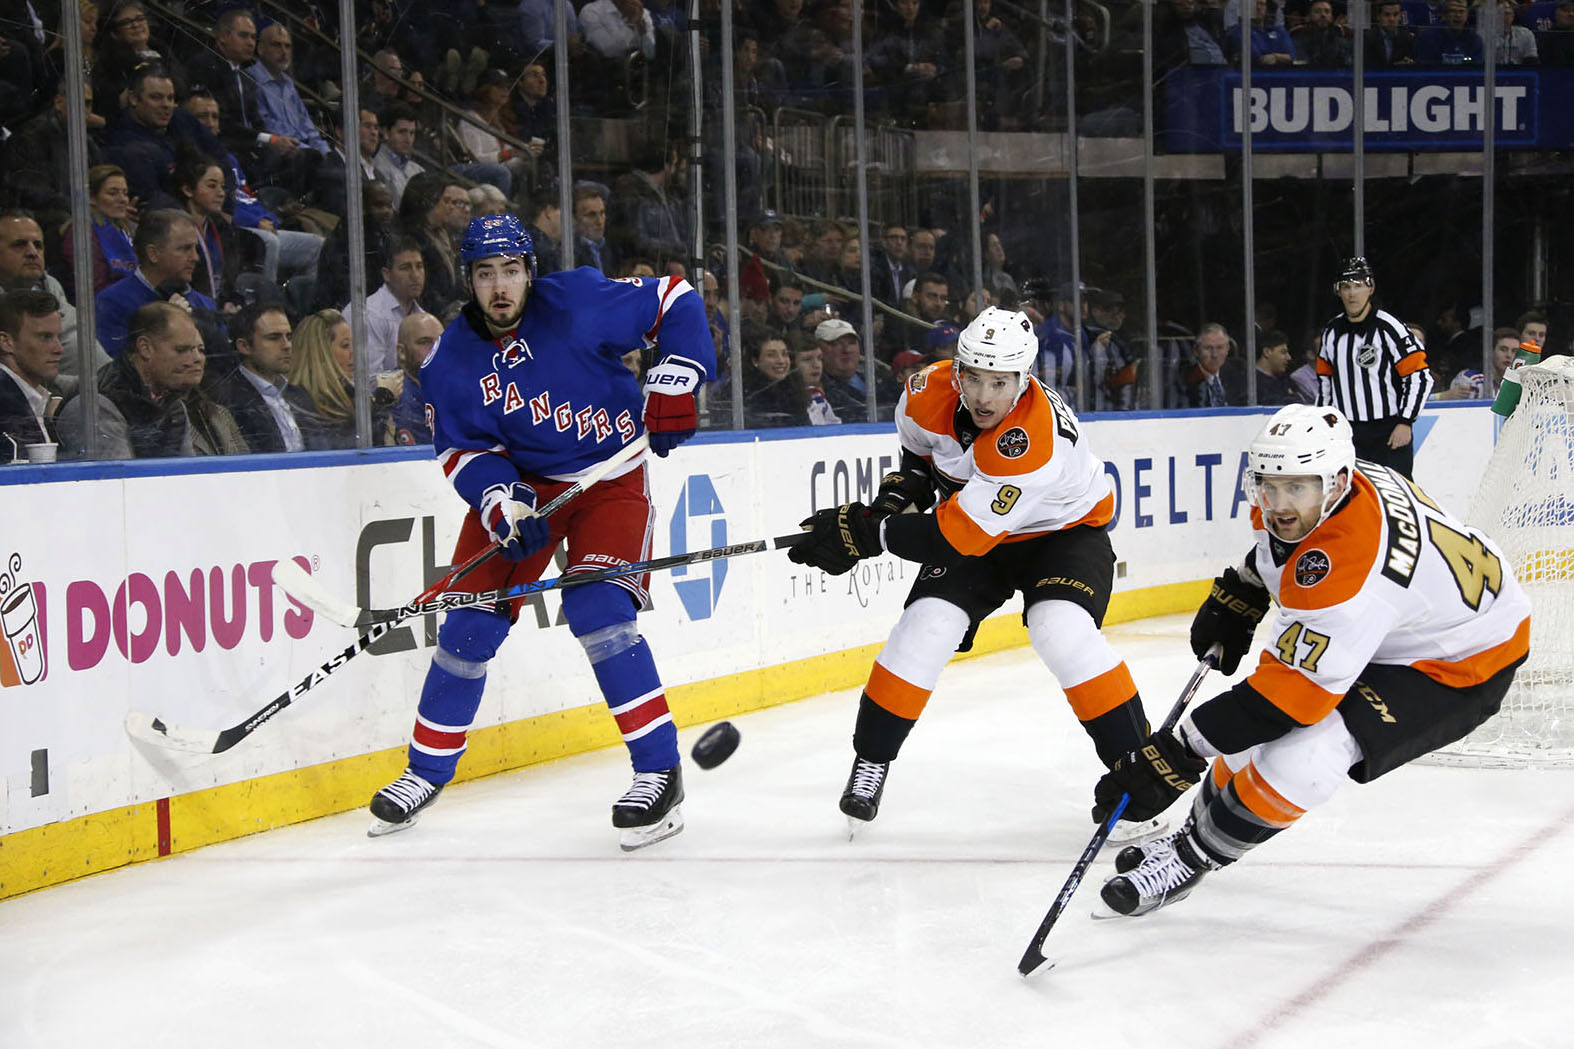 January 25, 2017: The New York Rangers face the Philadelphia Flyers at Madison Square Garden in New York City.